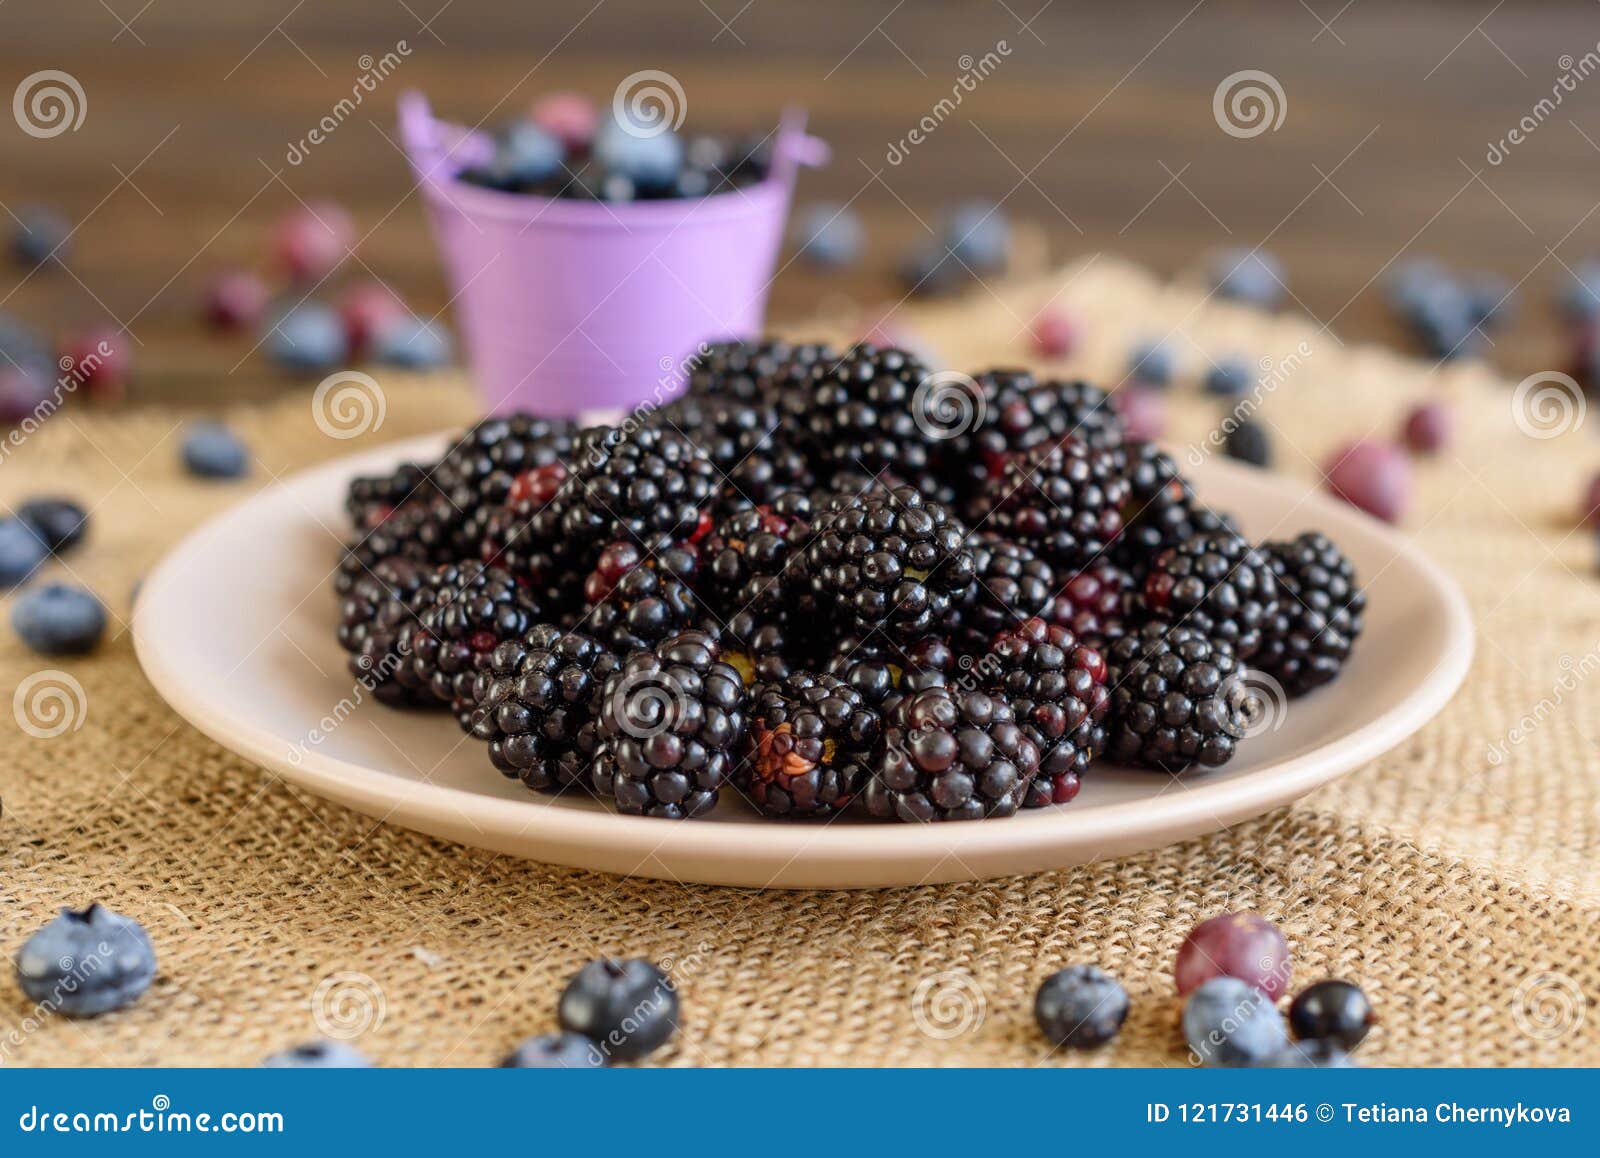 Fresh berries on a plate stock photo. Image of fruit - 121731446